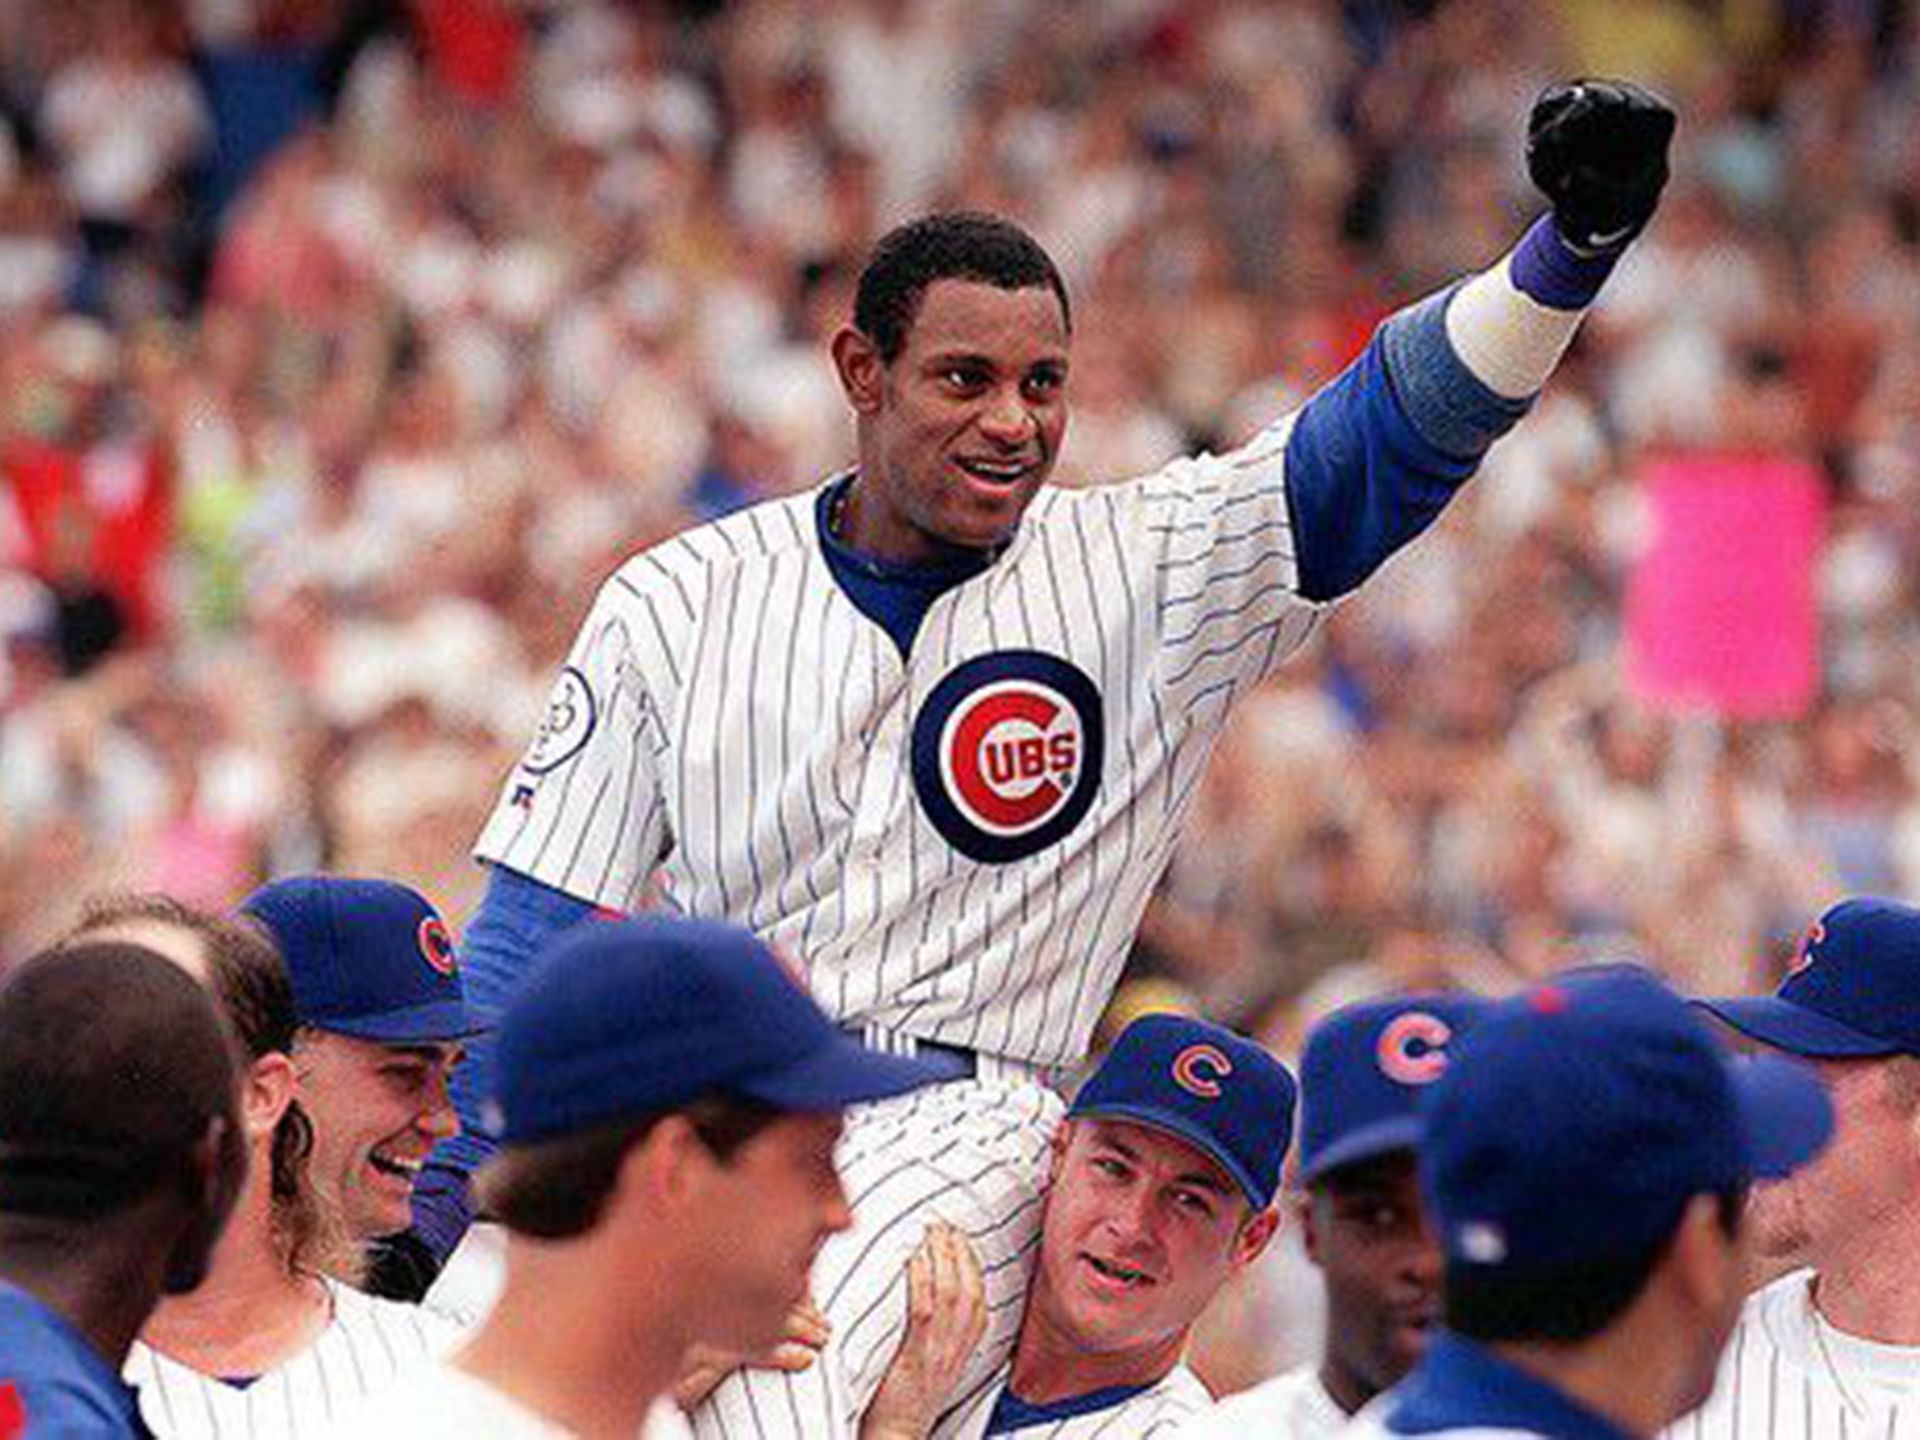 Sammy Sosa goes long on 1998, the Cubs and Mark McGwire - Sports